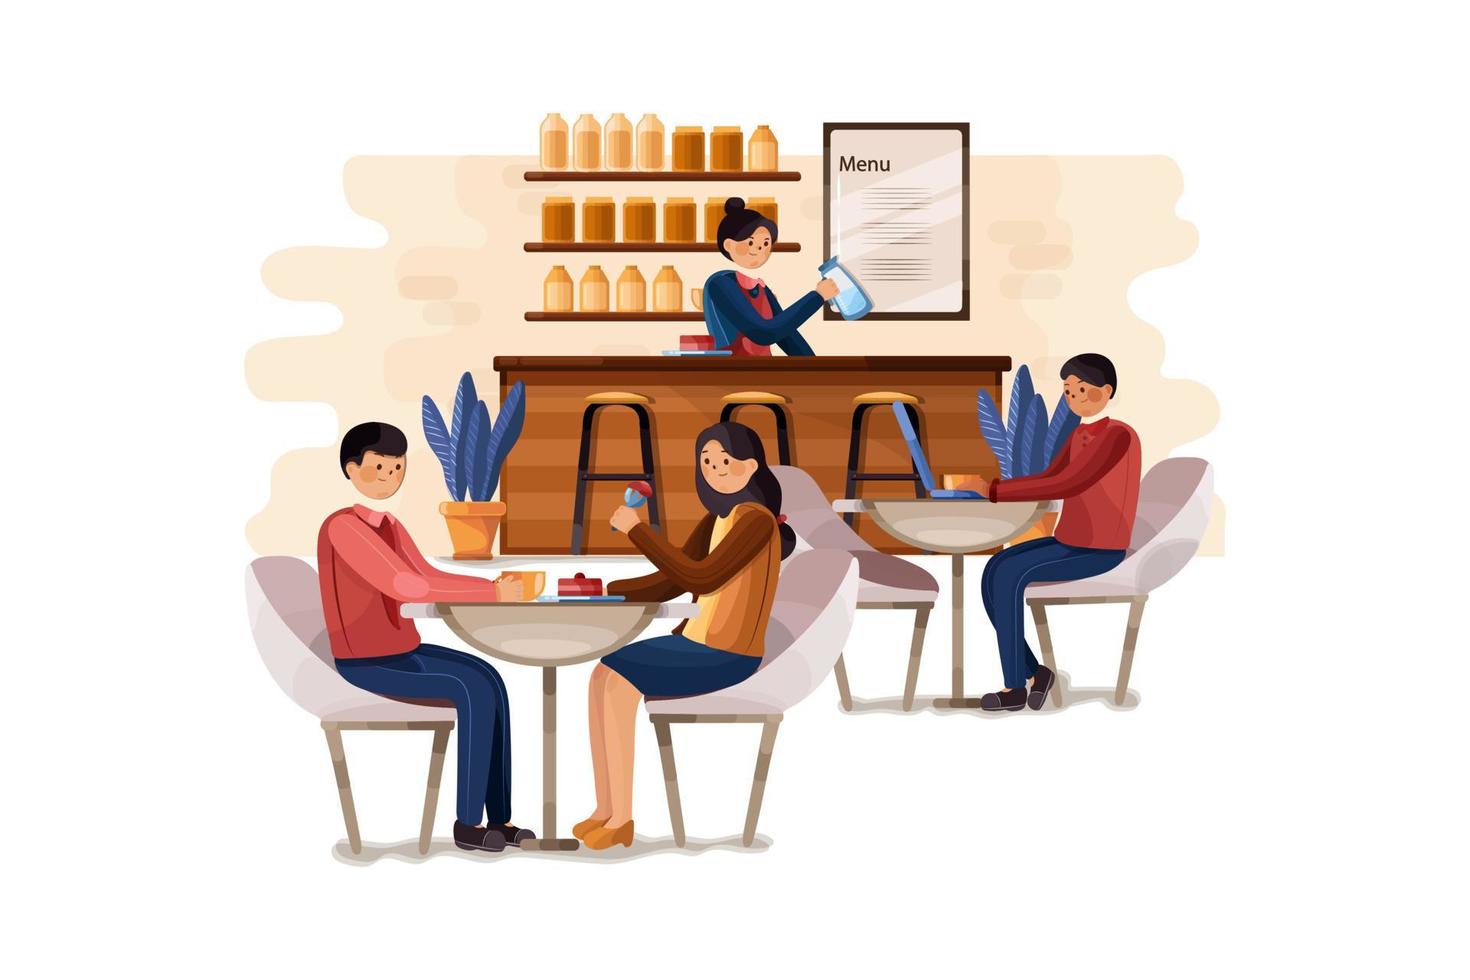 Cafe shop and people relaxing vector